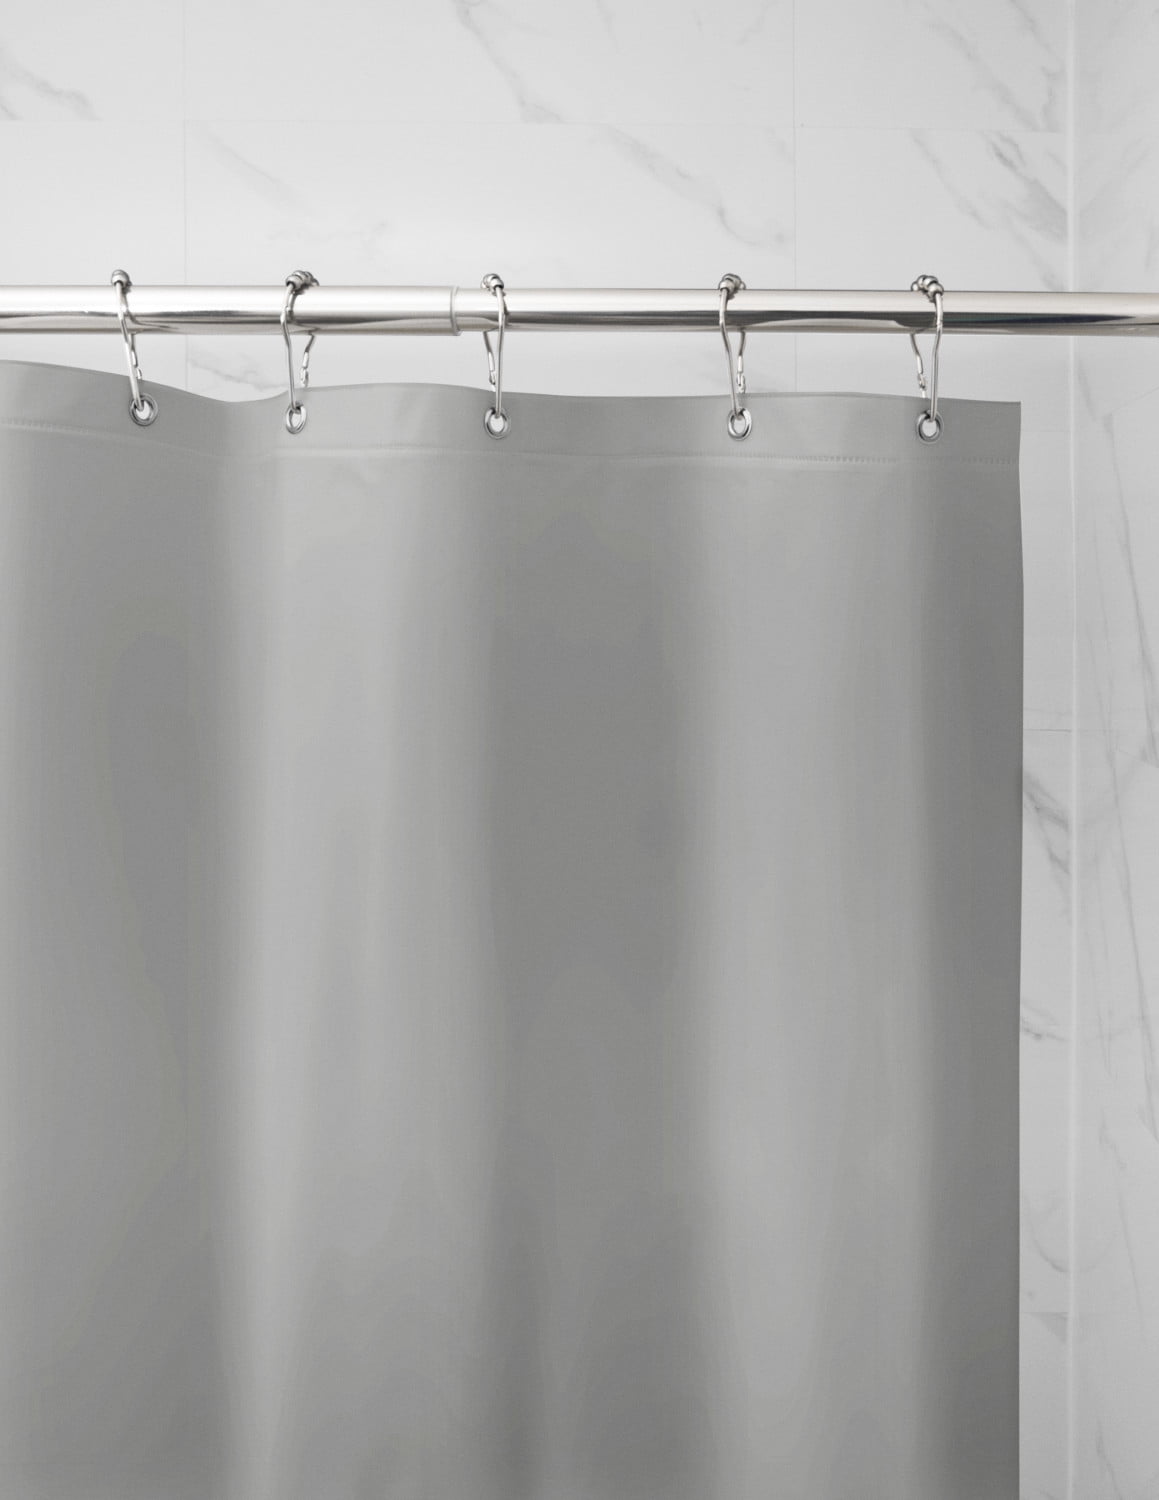 Shop Frosted Heavyweight PEVA Shower Liner with 2 Adhesive Clips, 70 x 72,  Better Homes & Gardens - Great Prices Await 